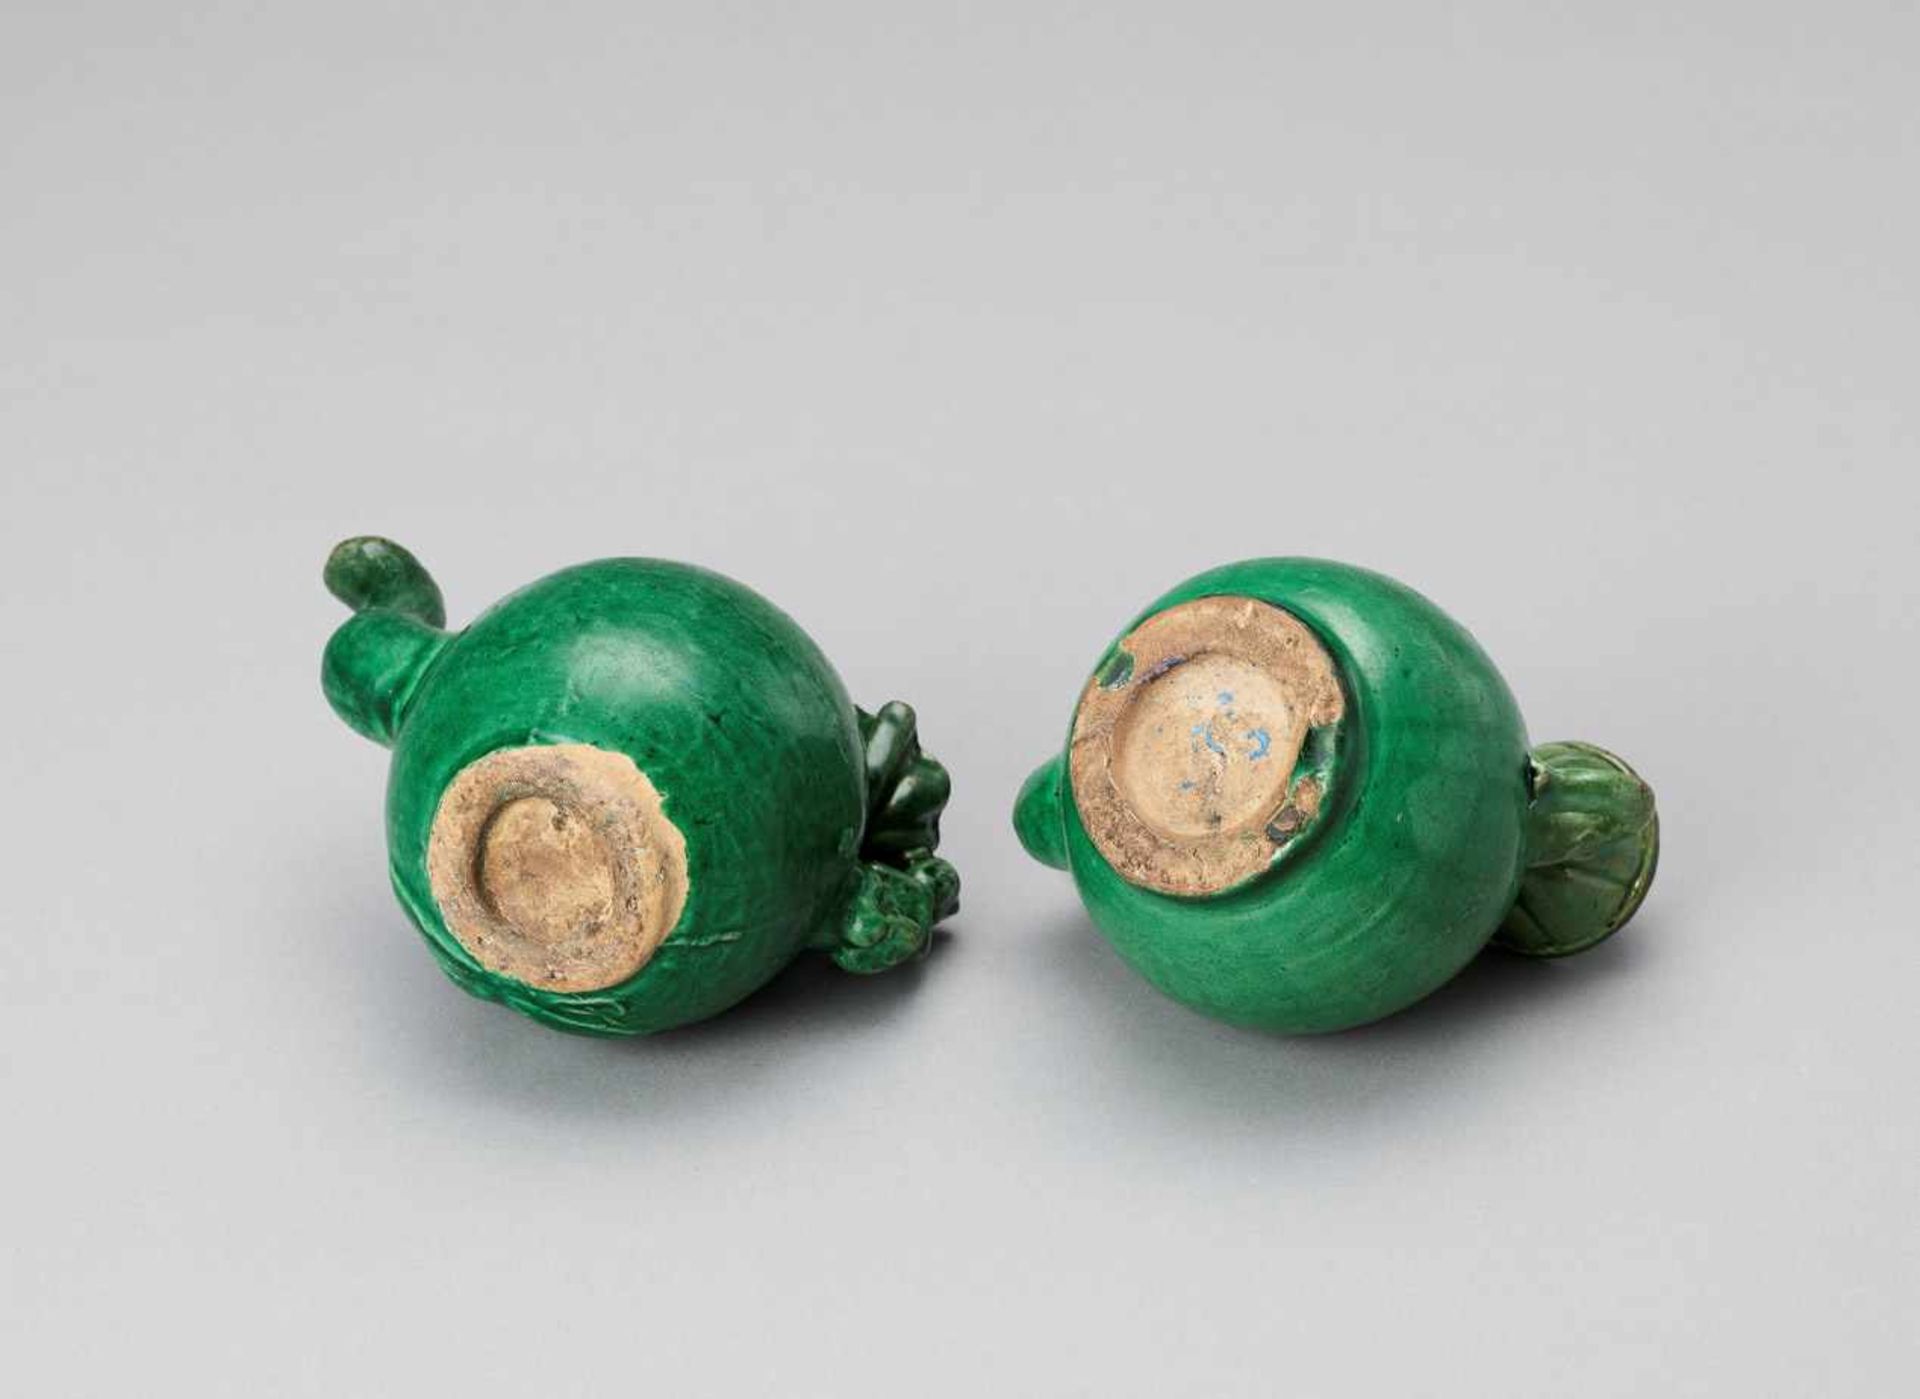 A PAIR OF EMERALD GREEN GLAZED POTTERY PEACH FORM WATER DROPPERS, KANGXI - Image 8 of 8